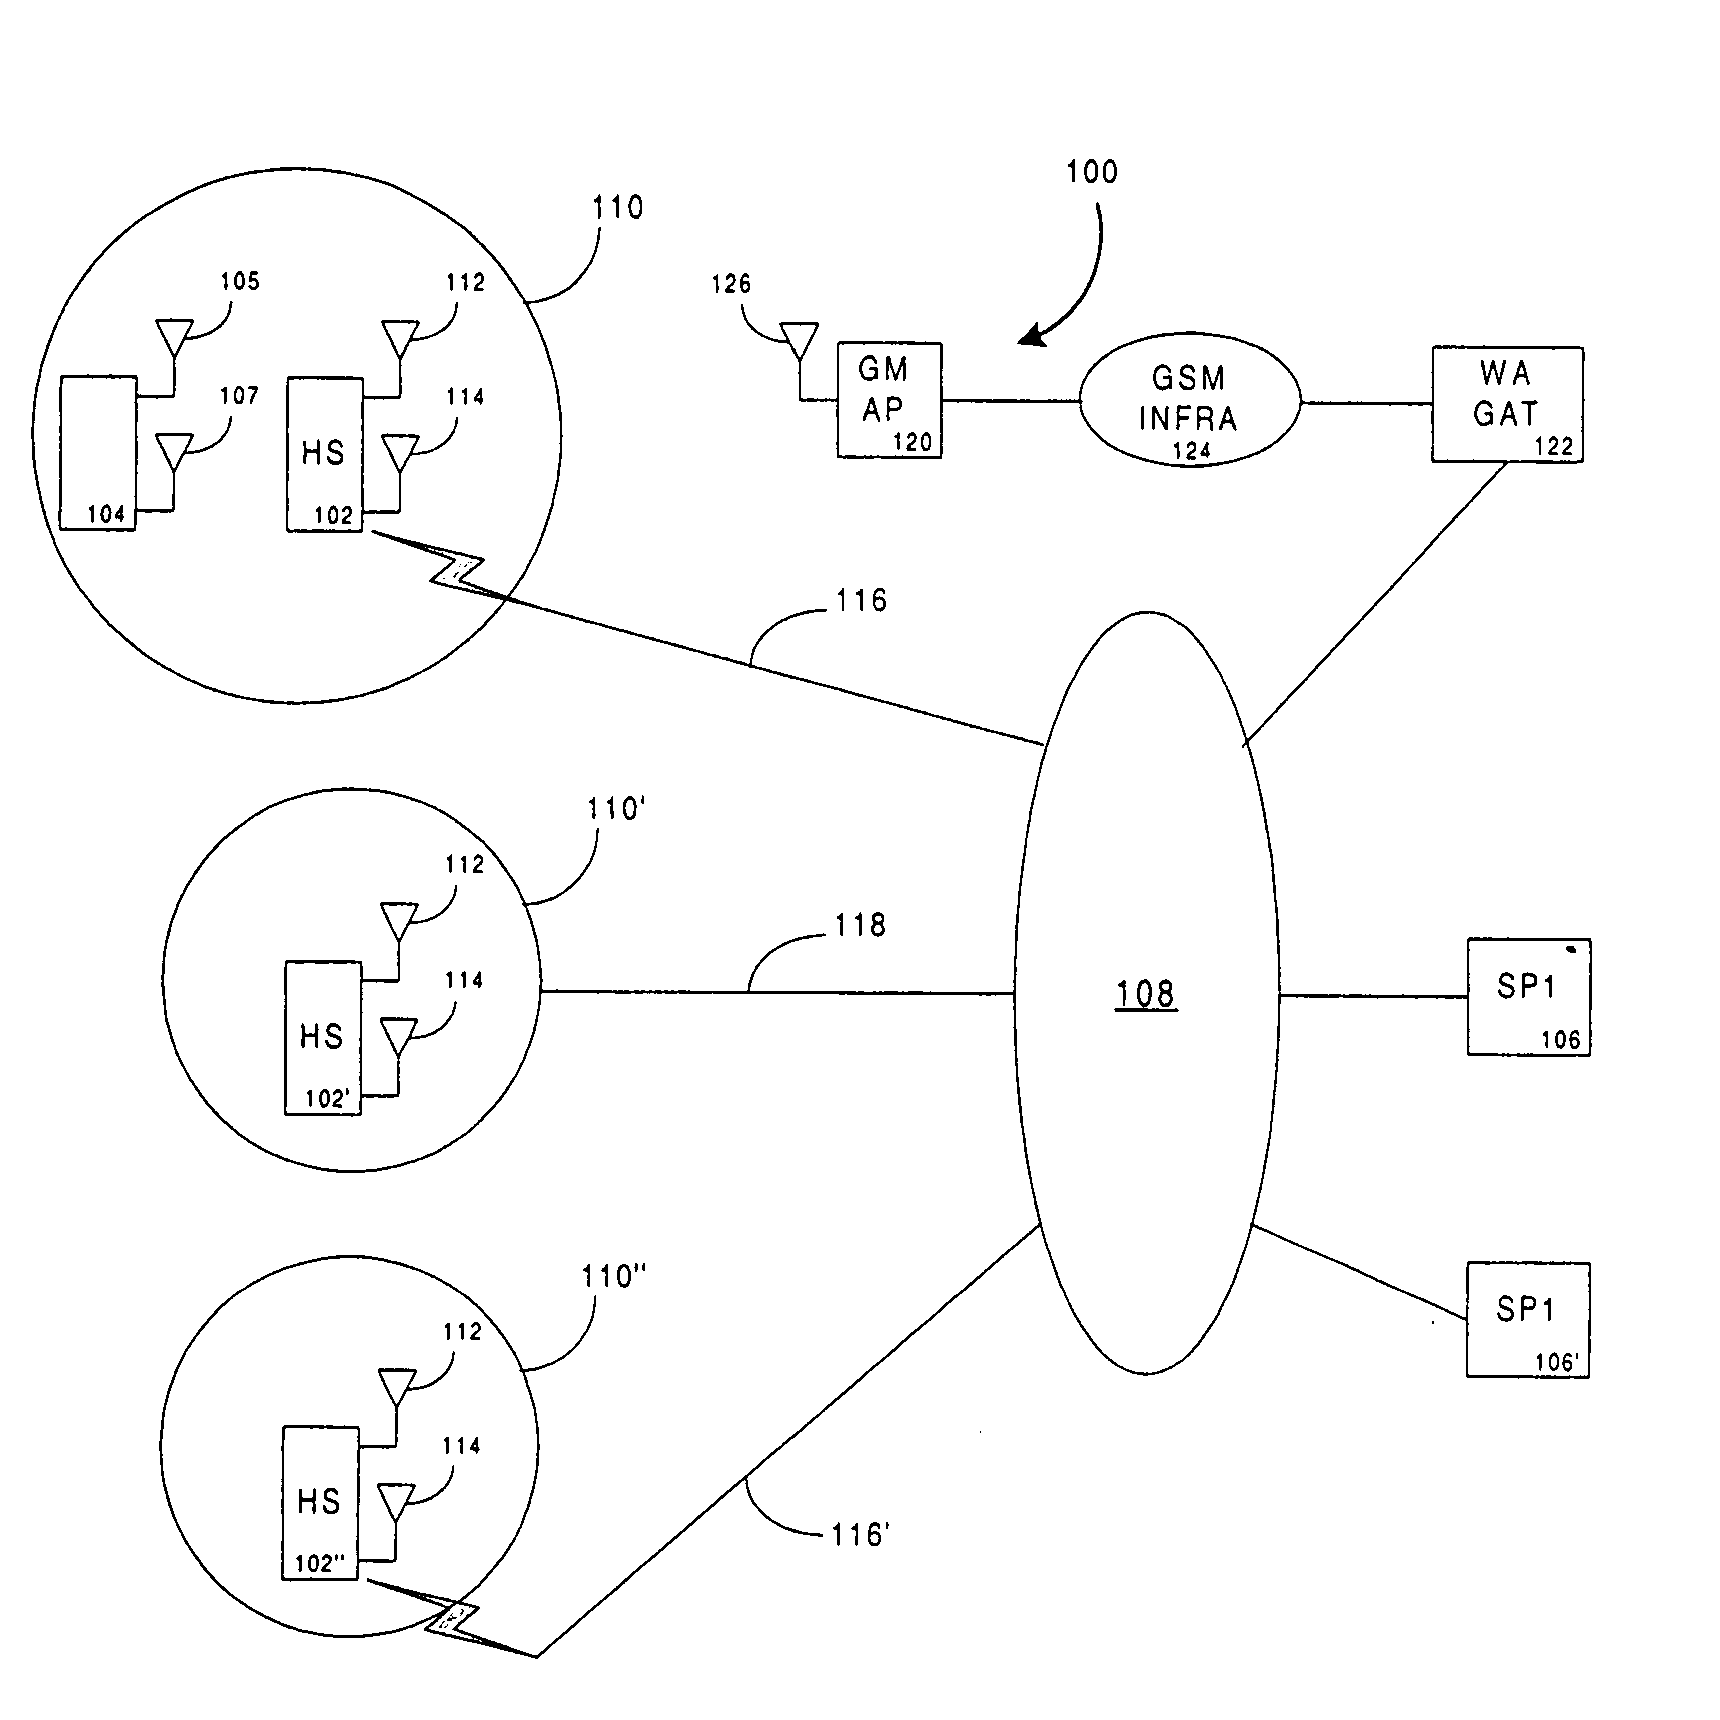 Mapping wireless proximity identificator to subscriber identity for hotspot based wireless services for mobile terminals